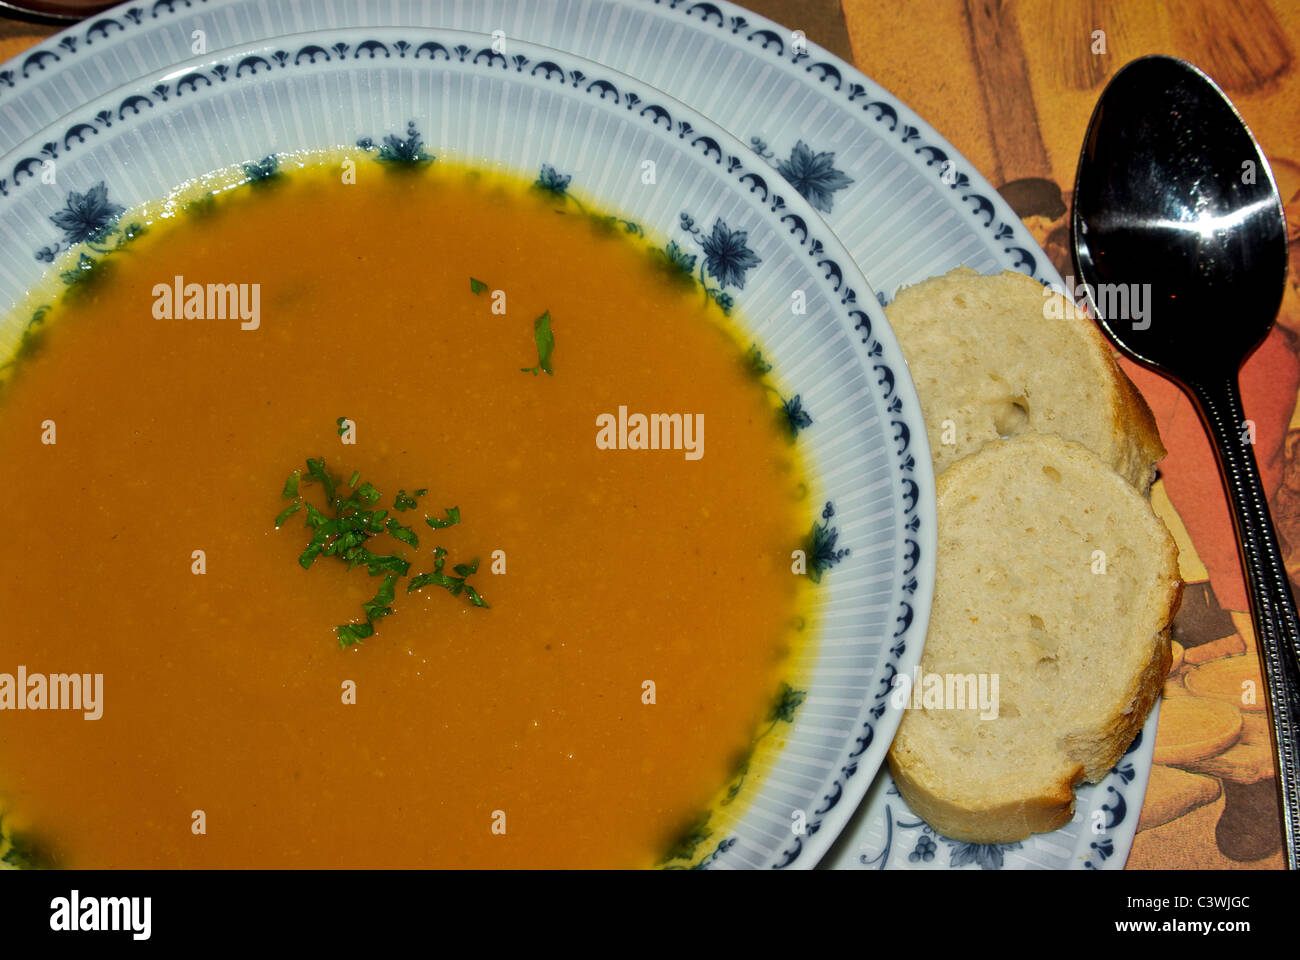 Pumpkin soup chopped parsely garnish in a painted porcelain bowl two slices baguette Stock Photo